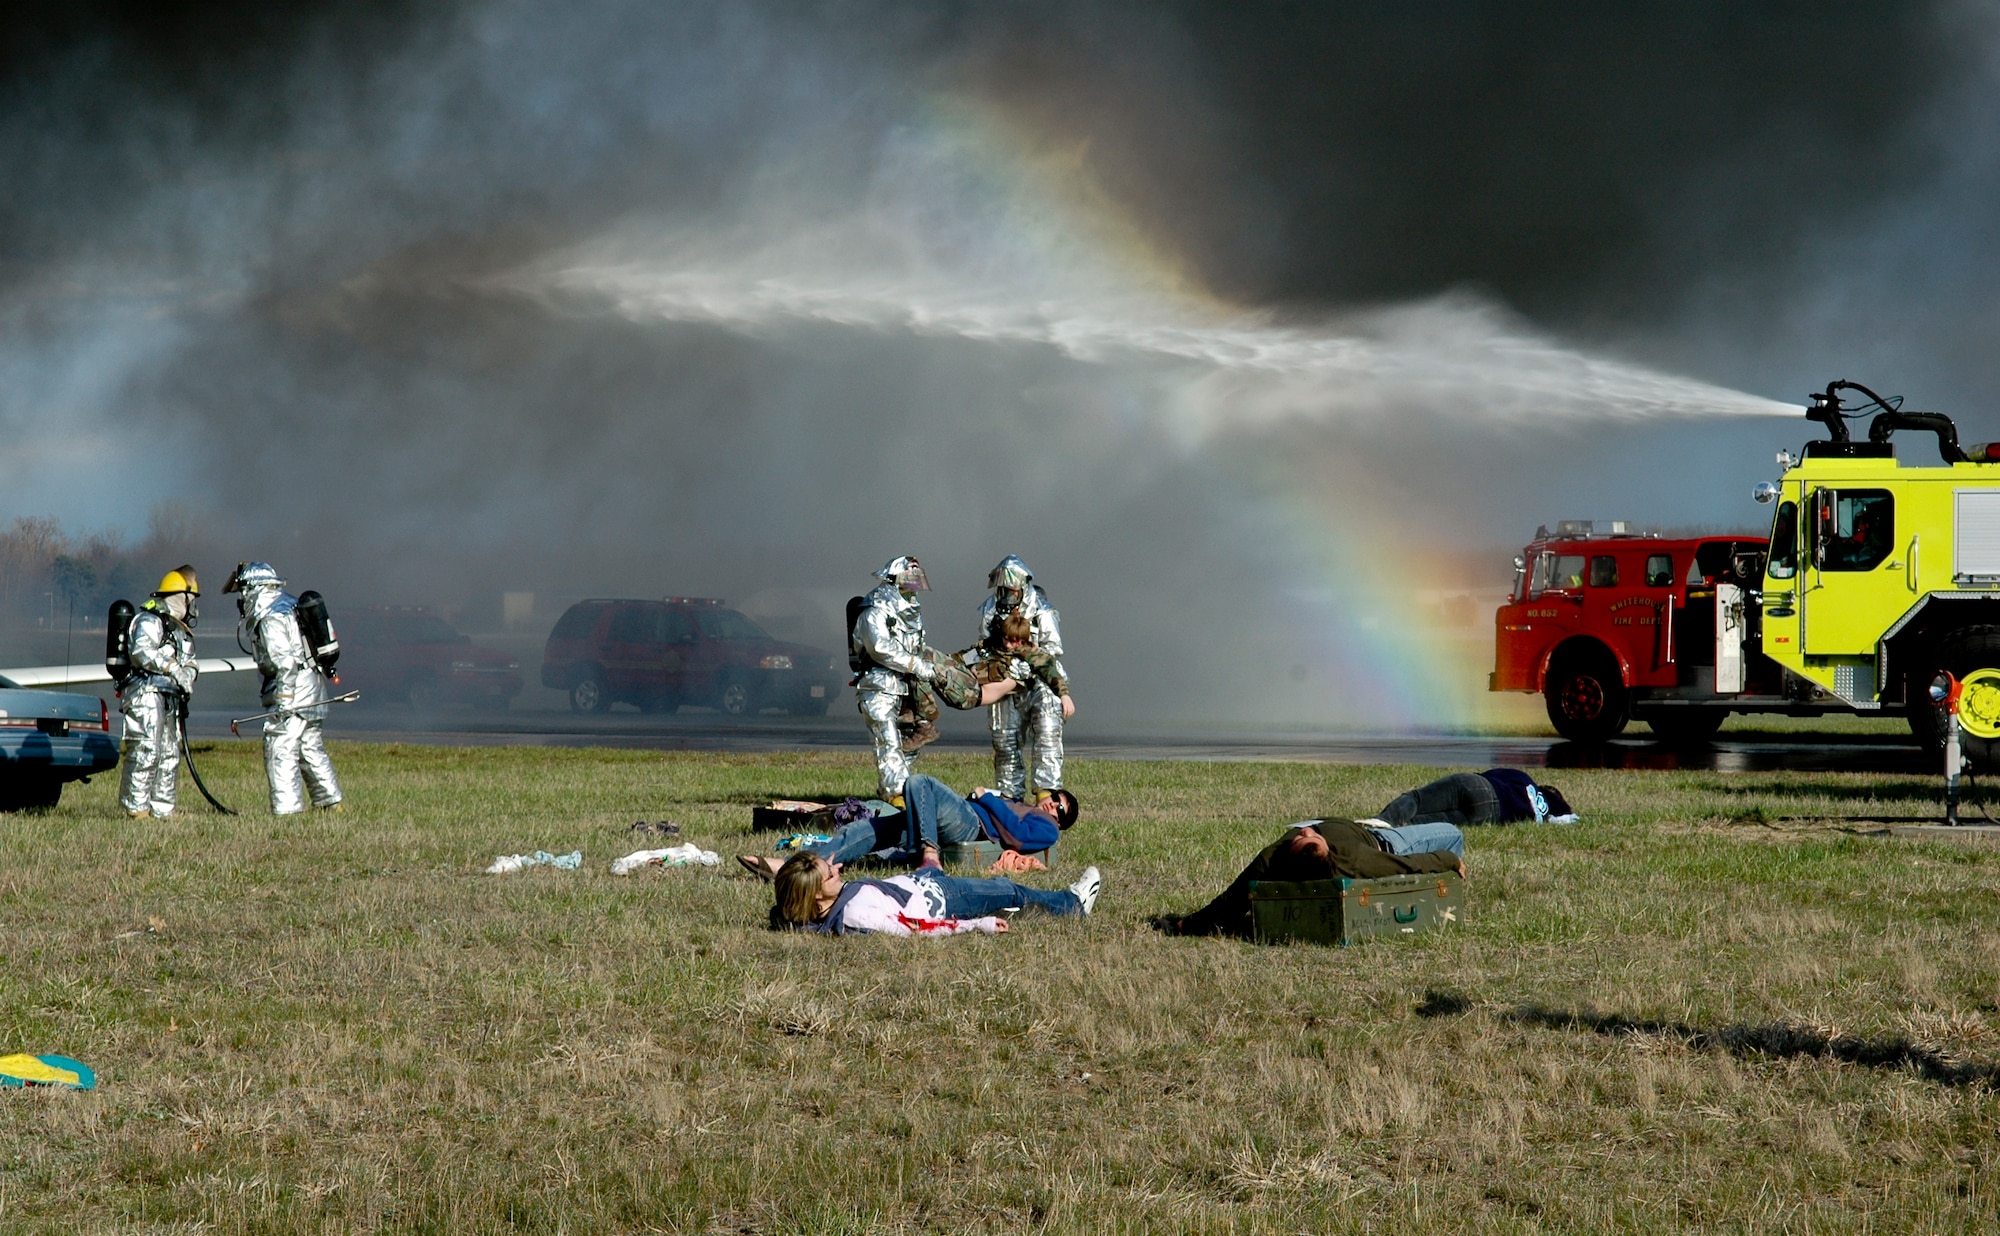 Members of the 180th Fighter Wing fire department participated in an aircraft crash and recovery exercise at the Toledo Express Airport on April 22. The drill, required every three years, not only tests the response of airport authorities, but also the response of other local emergency, fire and rescue crews that would normally respond to such an incident, to include the 180th FW fire department.